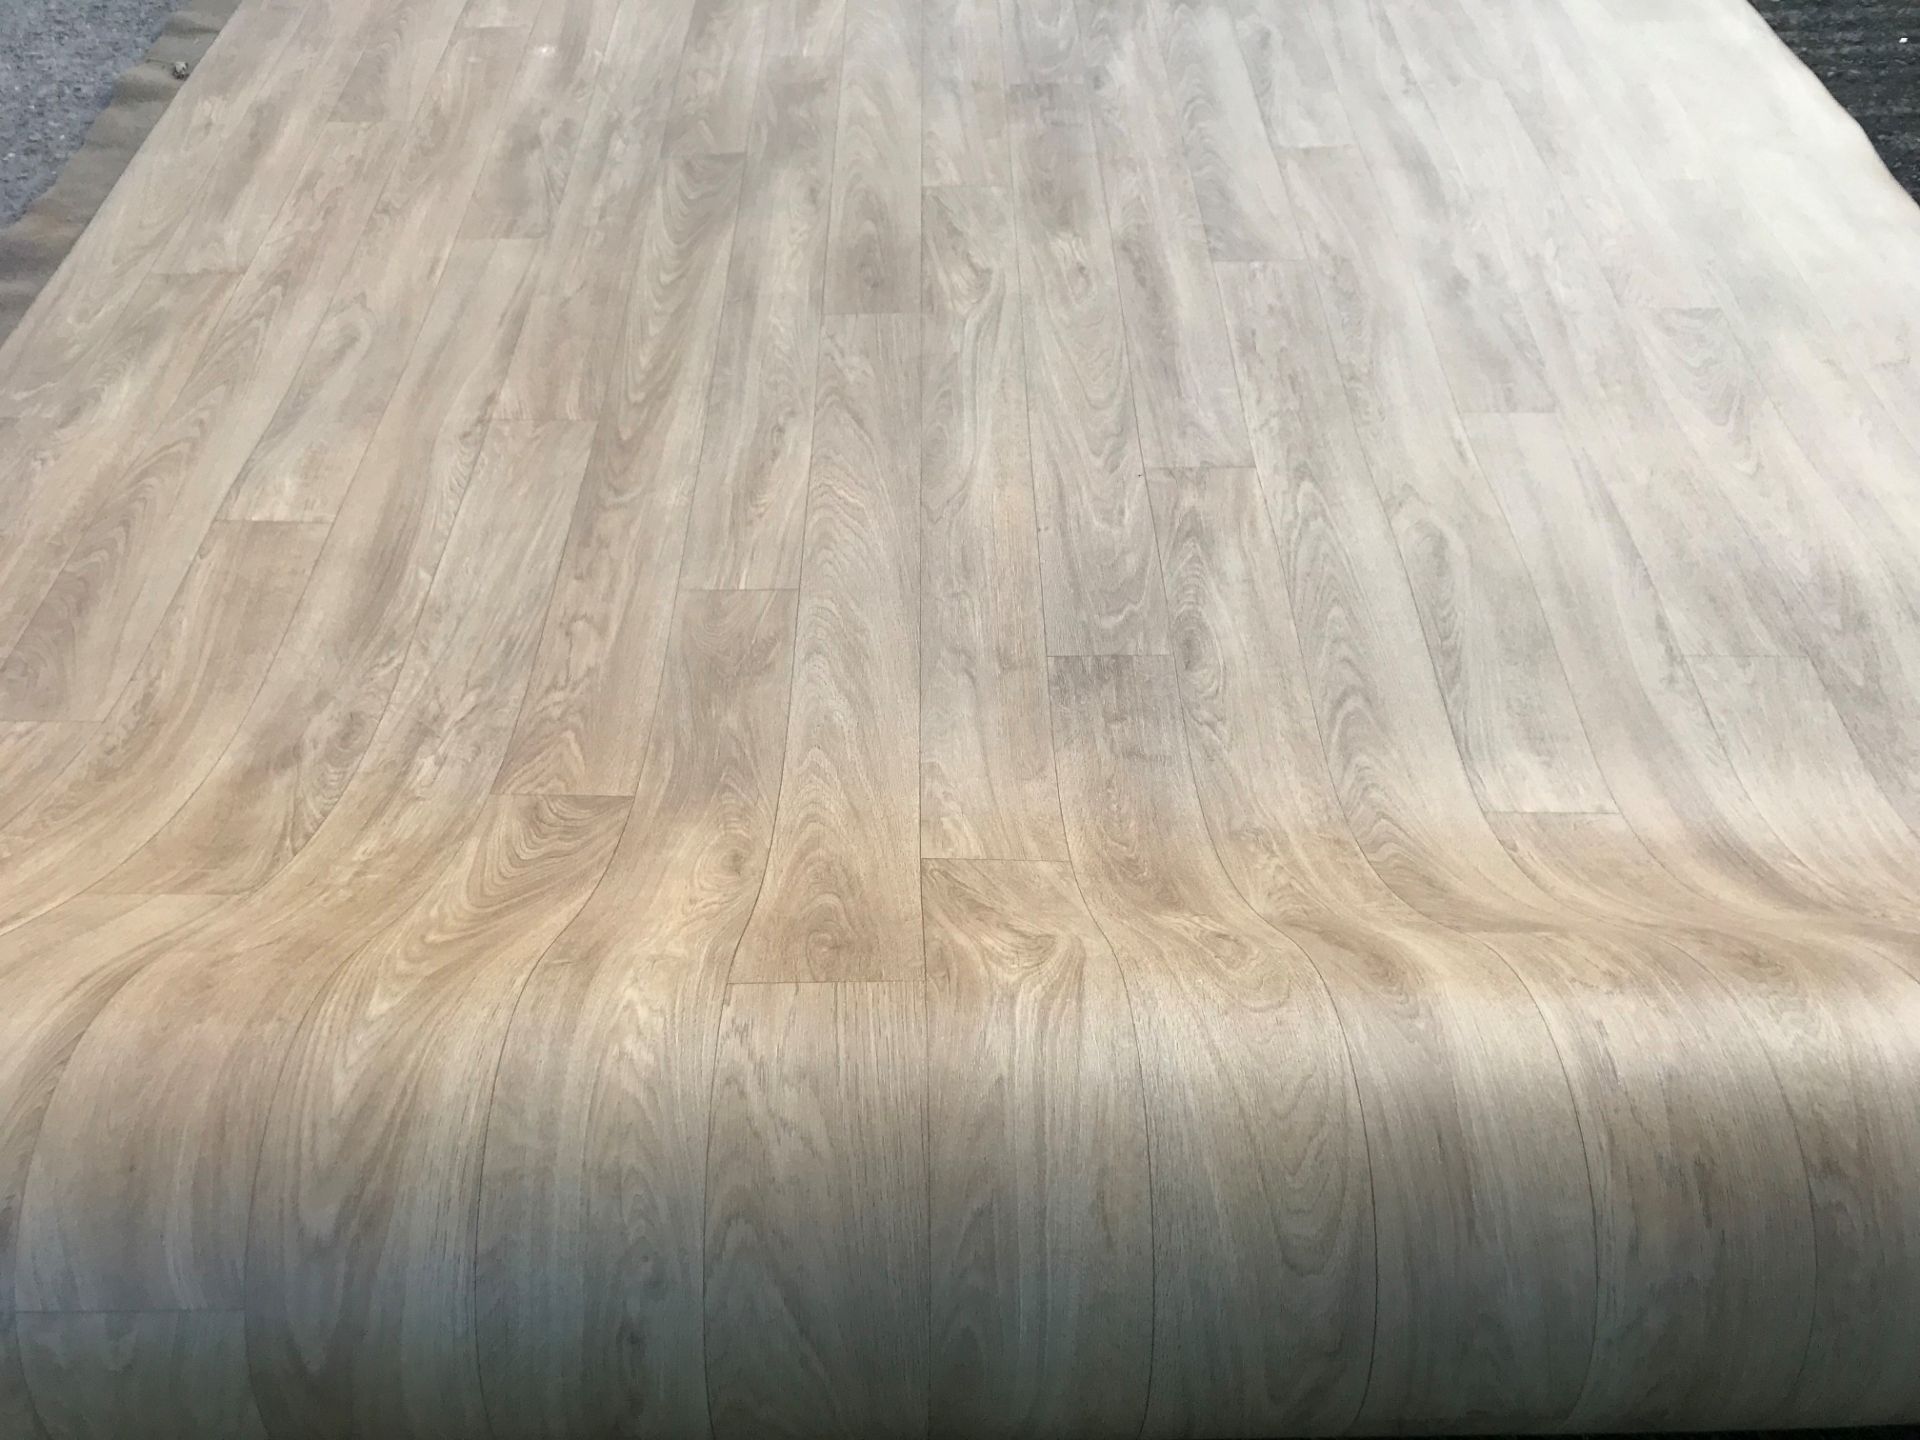 1 x ALTRO Altro Woodsafe Safety Flooring - Colour Natural Oak - 20X2 Meter Roll - Ref: NWF016 - - Image 2 of 4